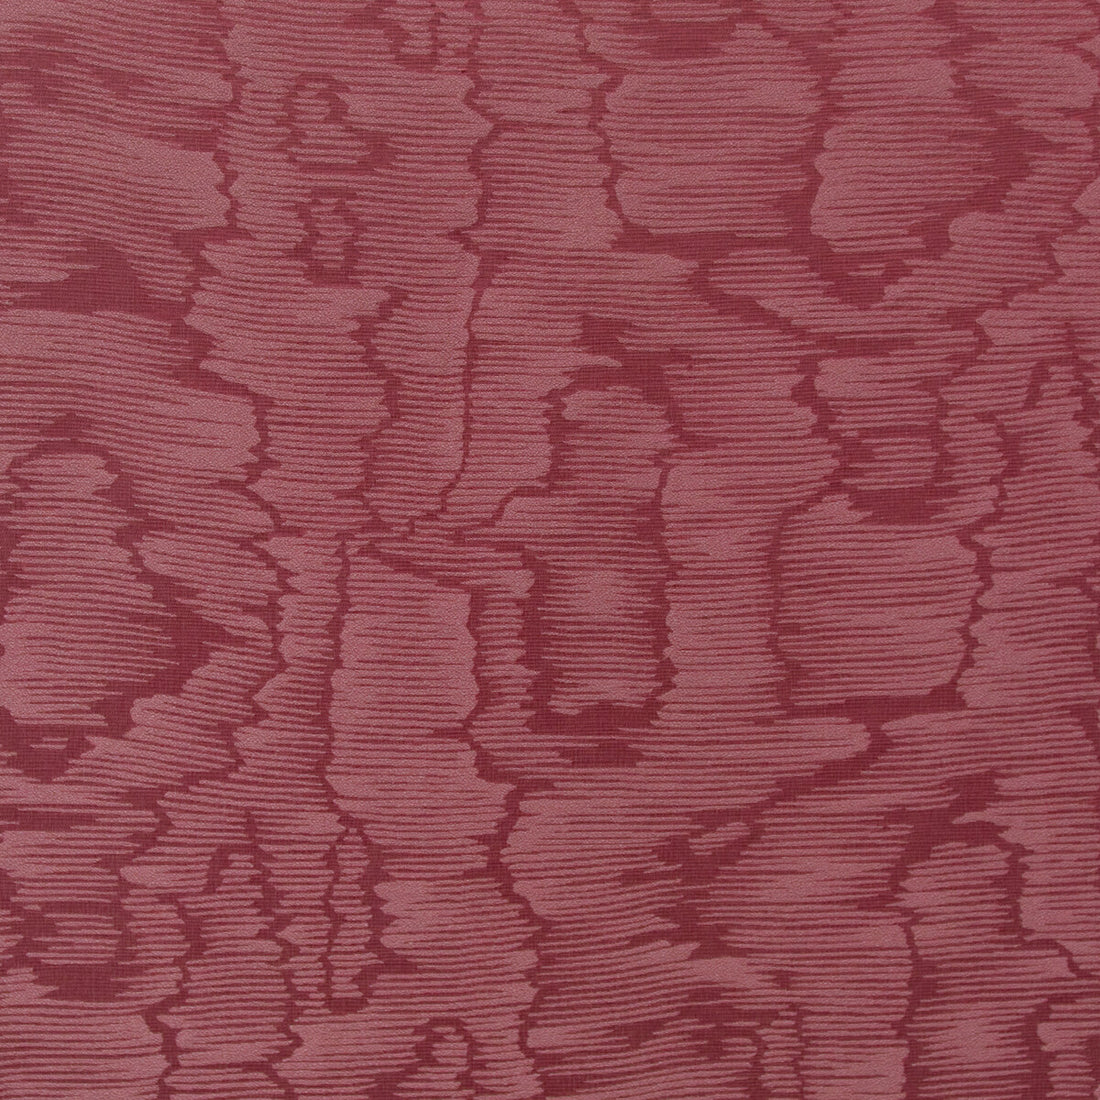 Lyon Weave fabric in berry color - pattern 8023145.97.0 - by Brunschwig &amp; Fils in the Vienne Silks collection